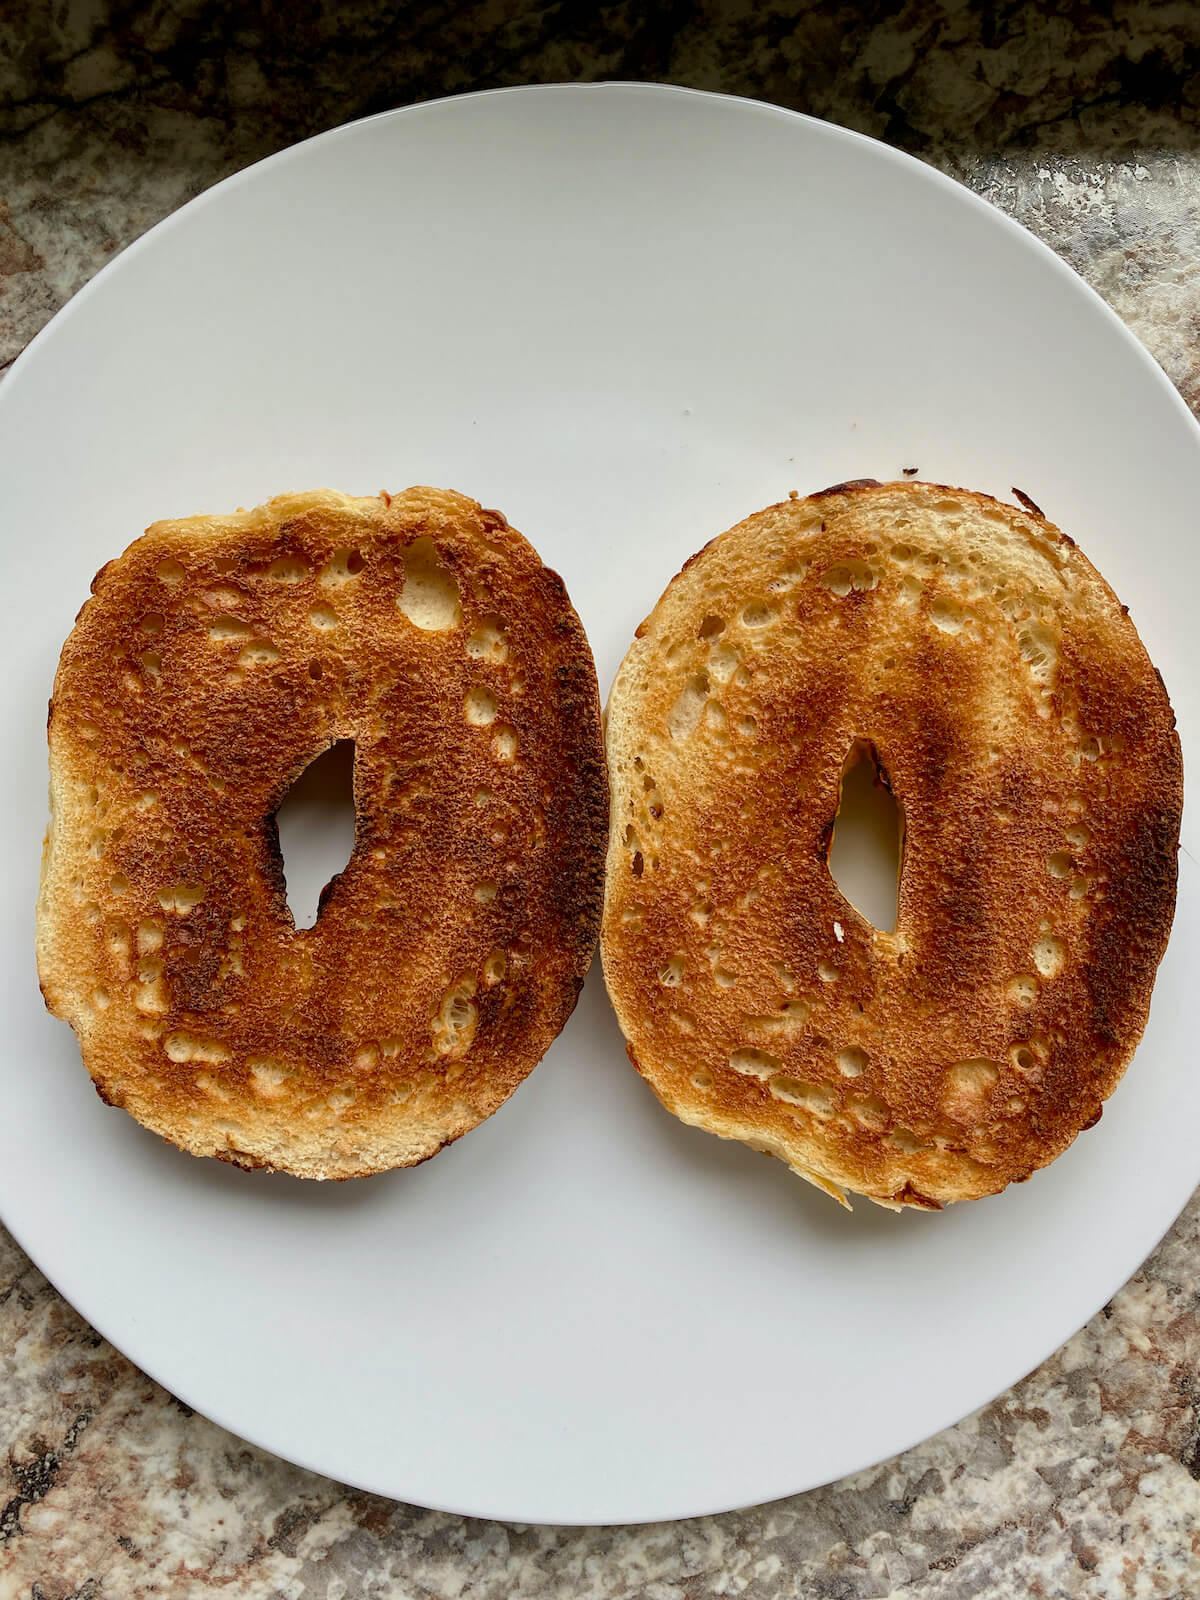 Two halves of a toasted bagel on a white plate.